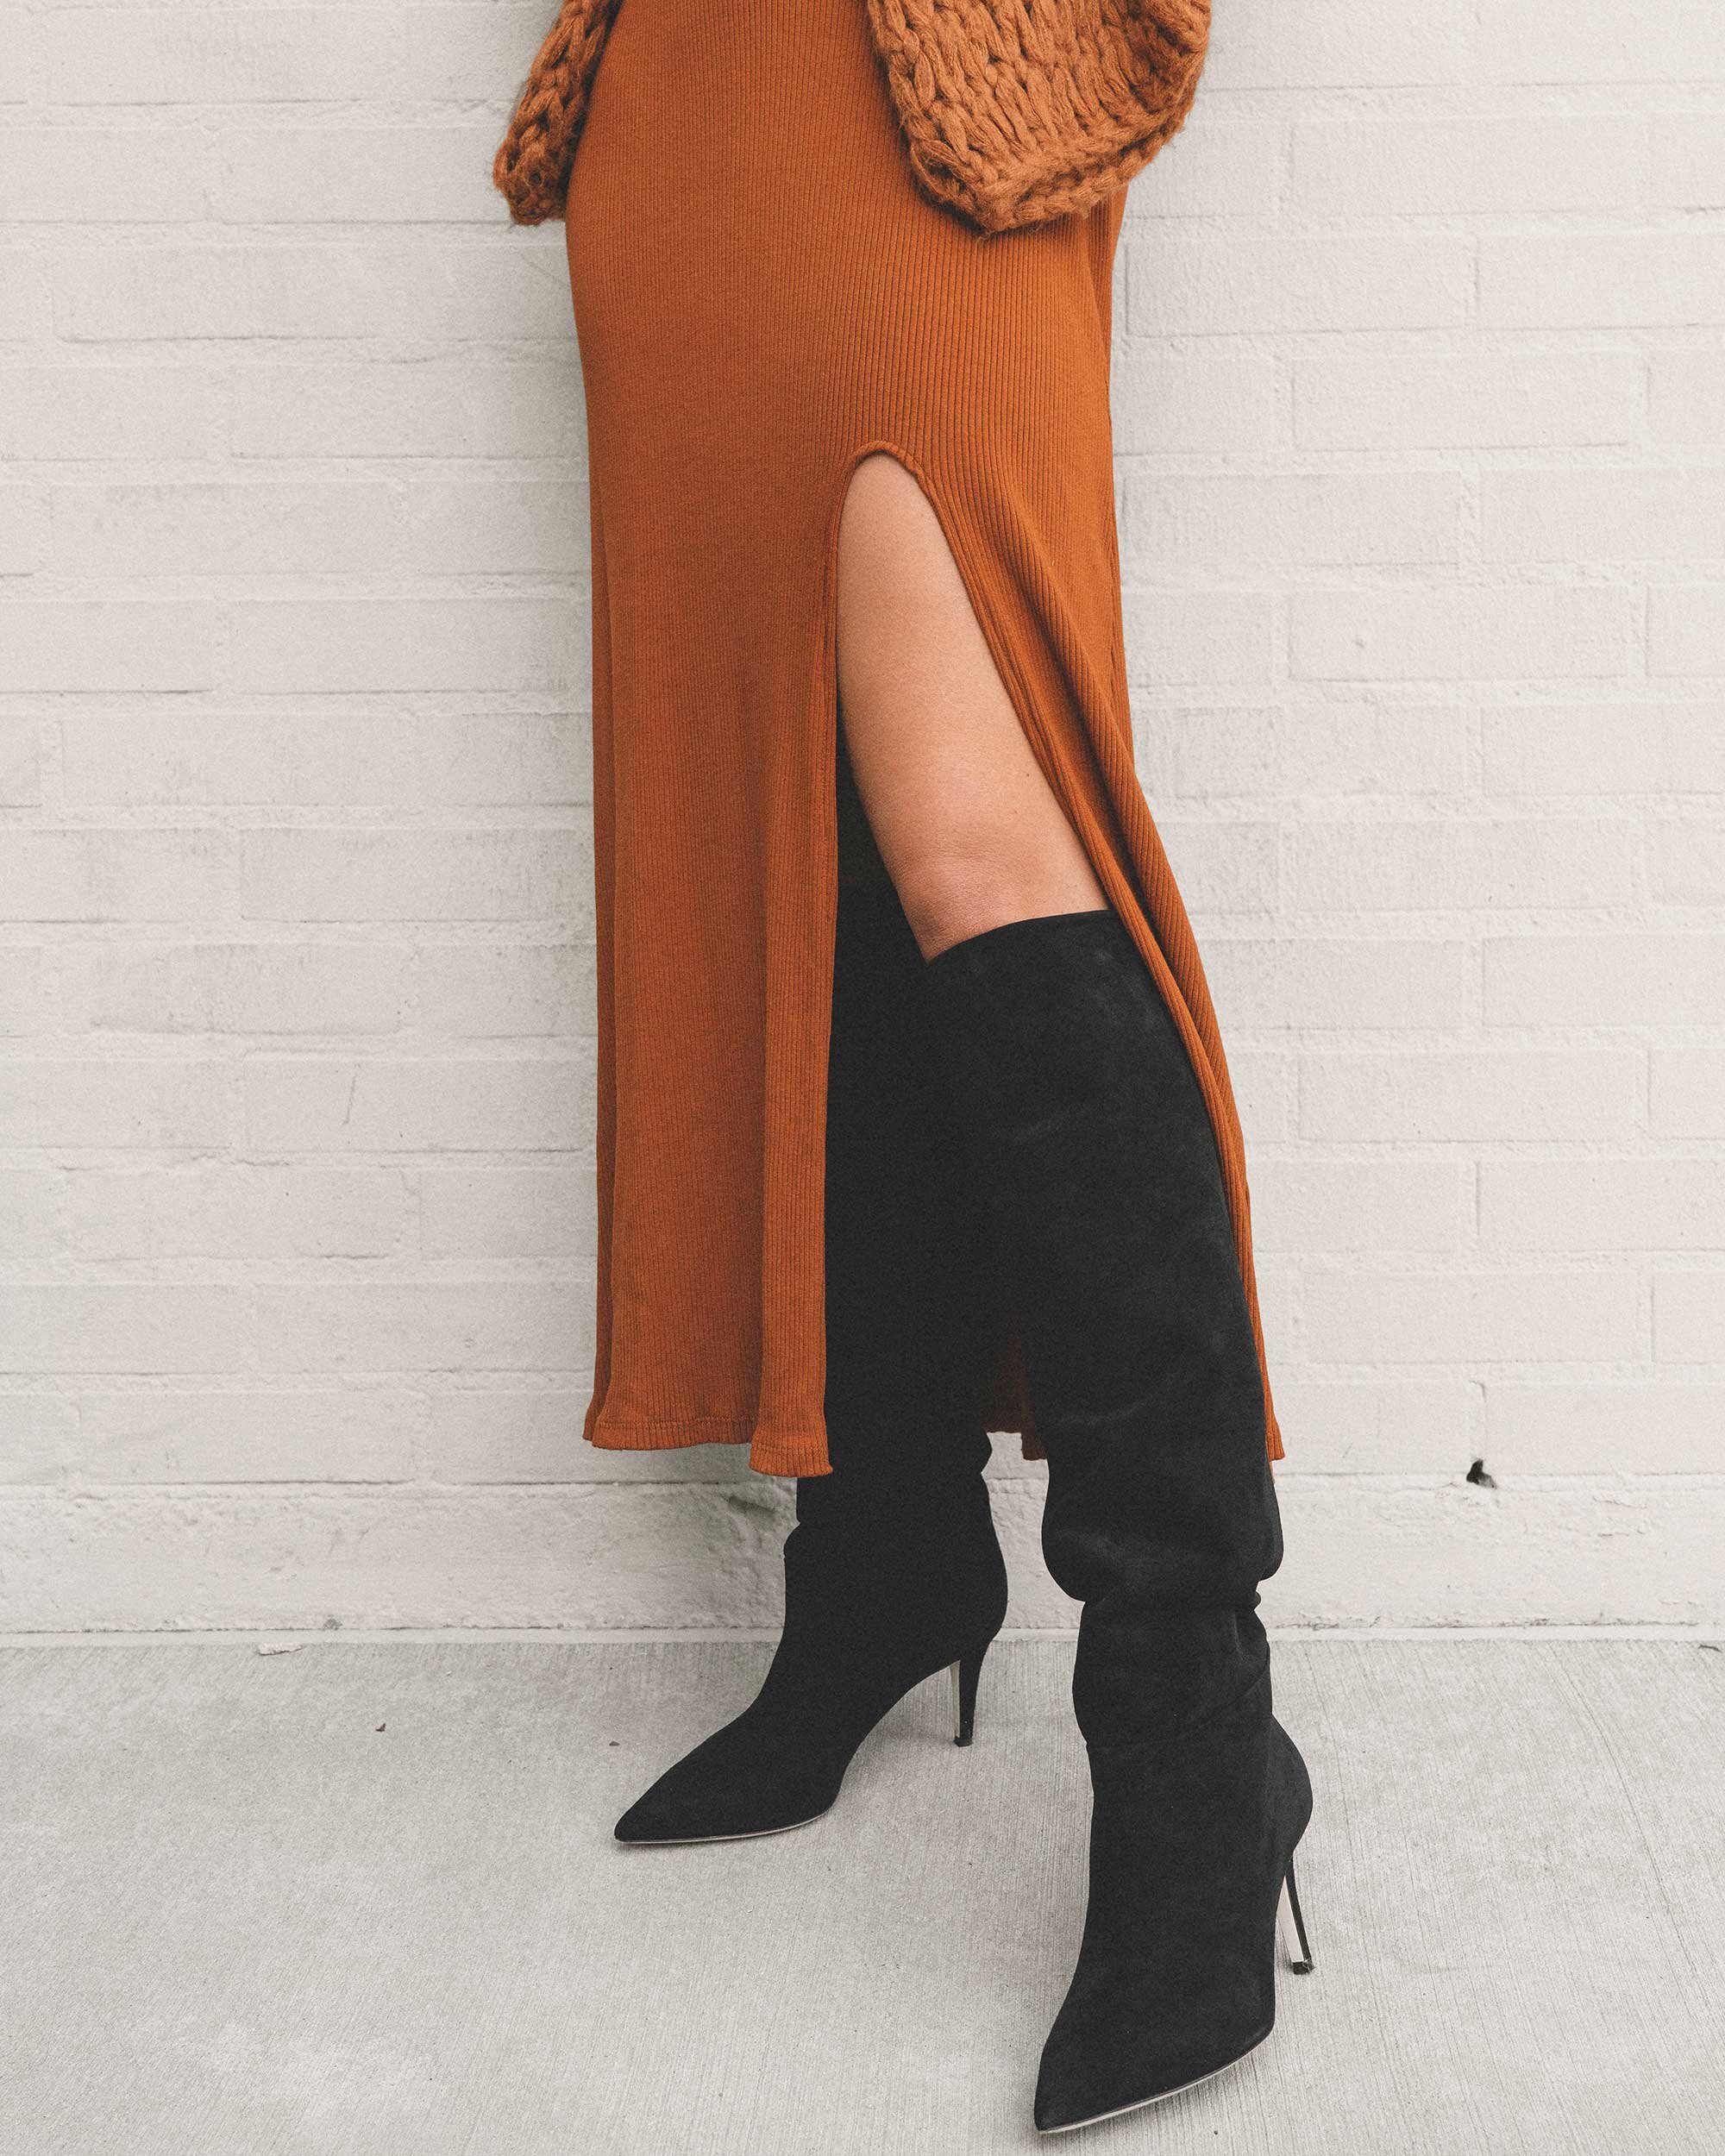 Maxi Dress and Knee High Boots 